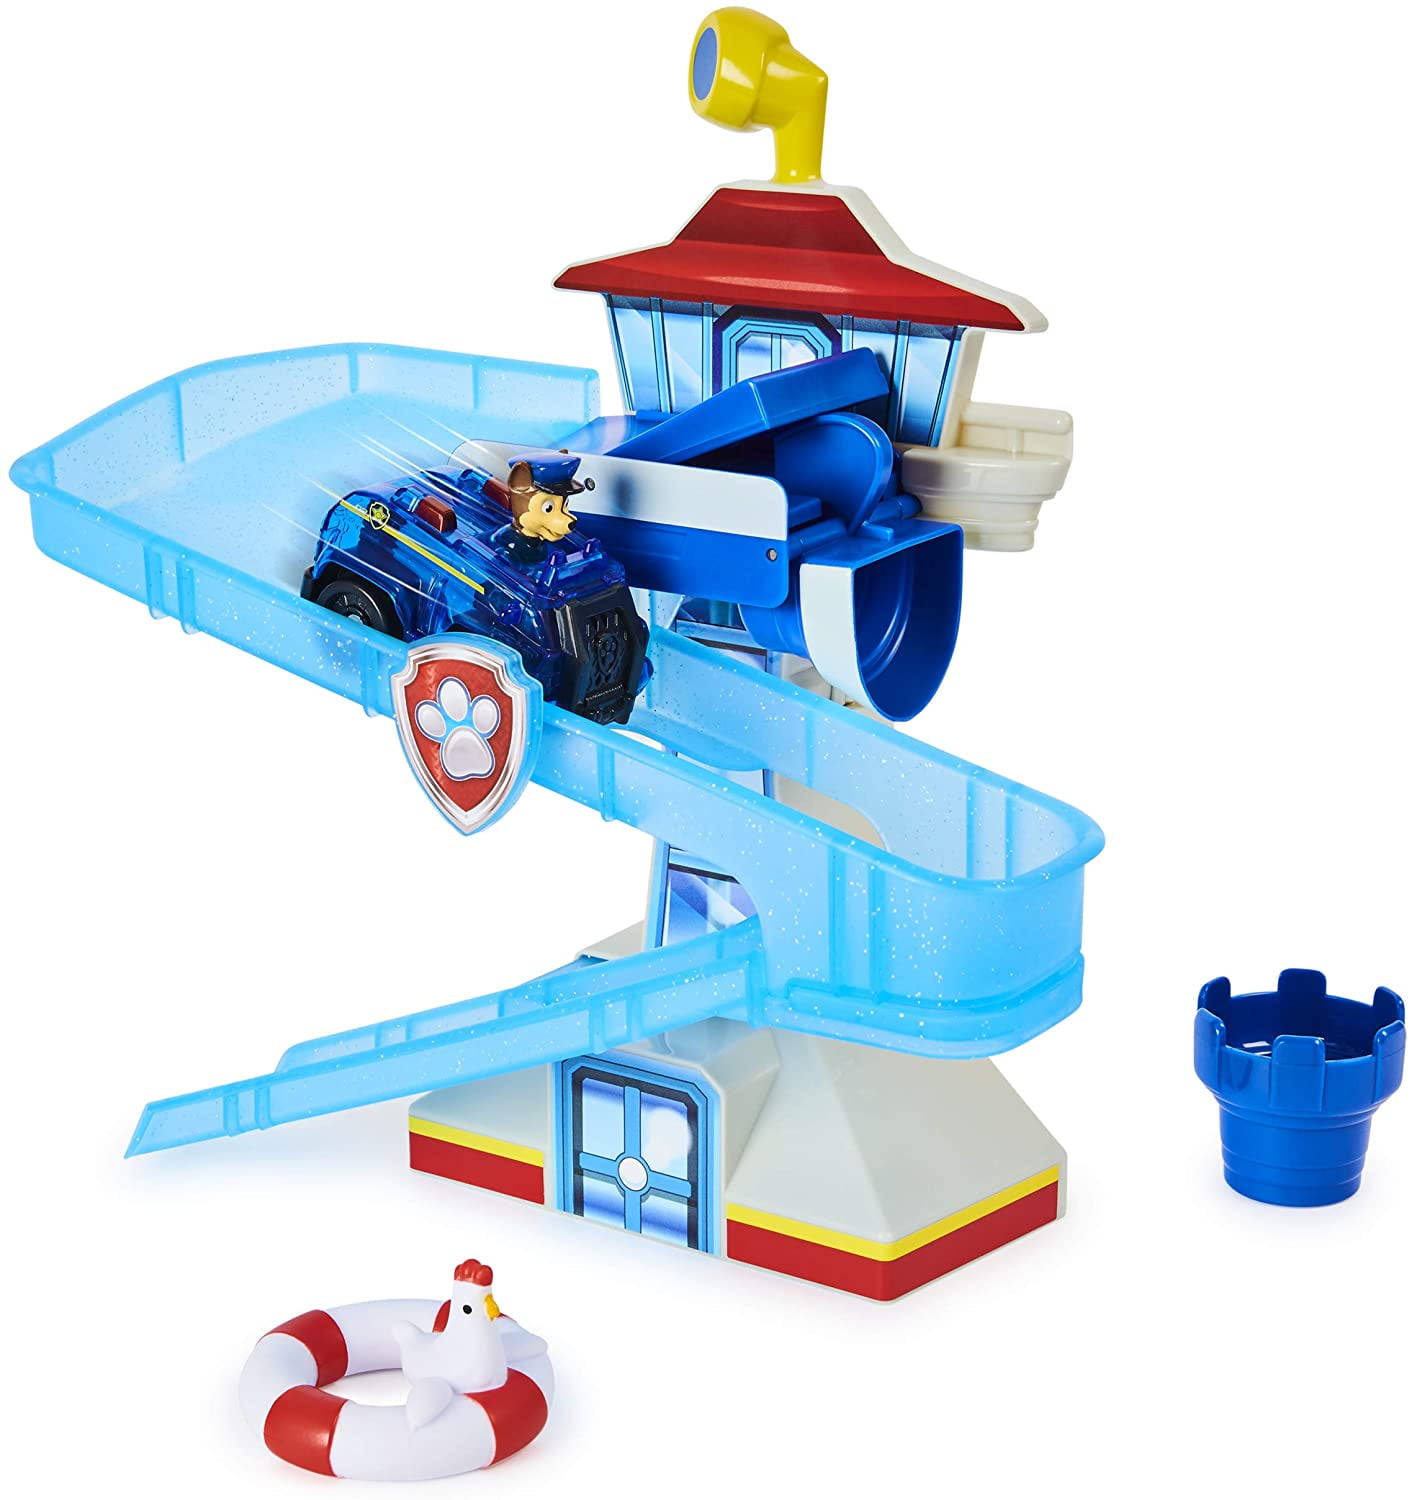 Paw Patrol Adventure Bath Playset with Chase Vehicle